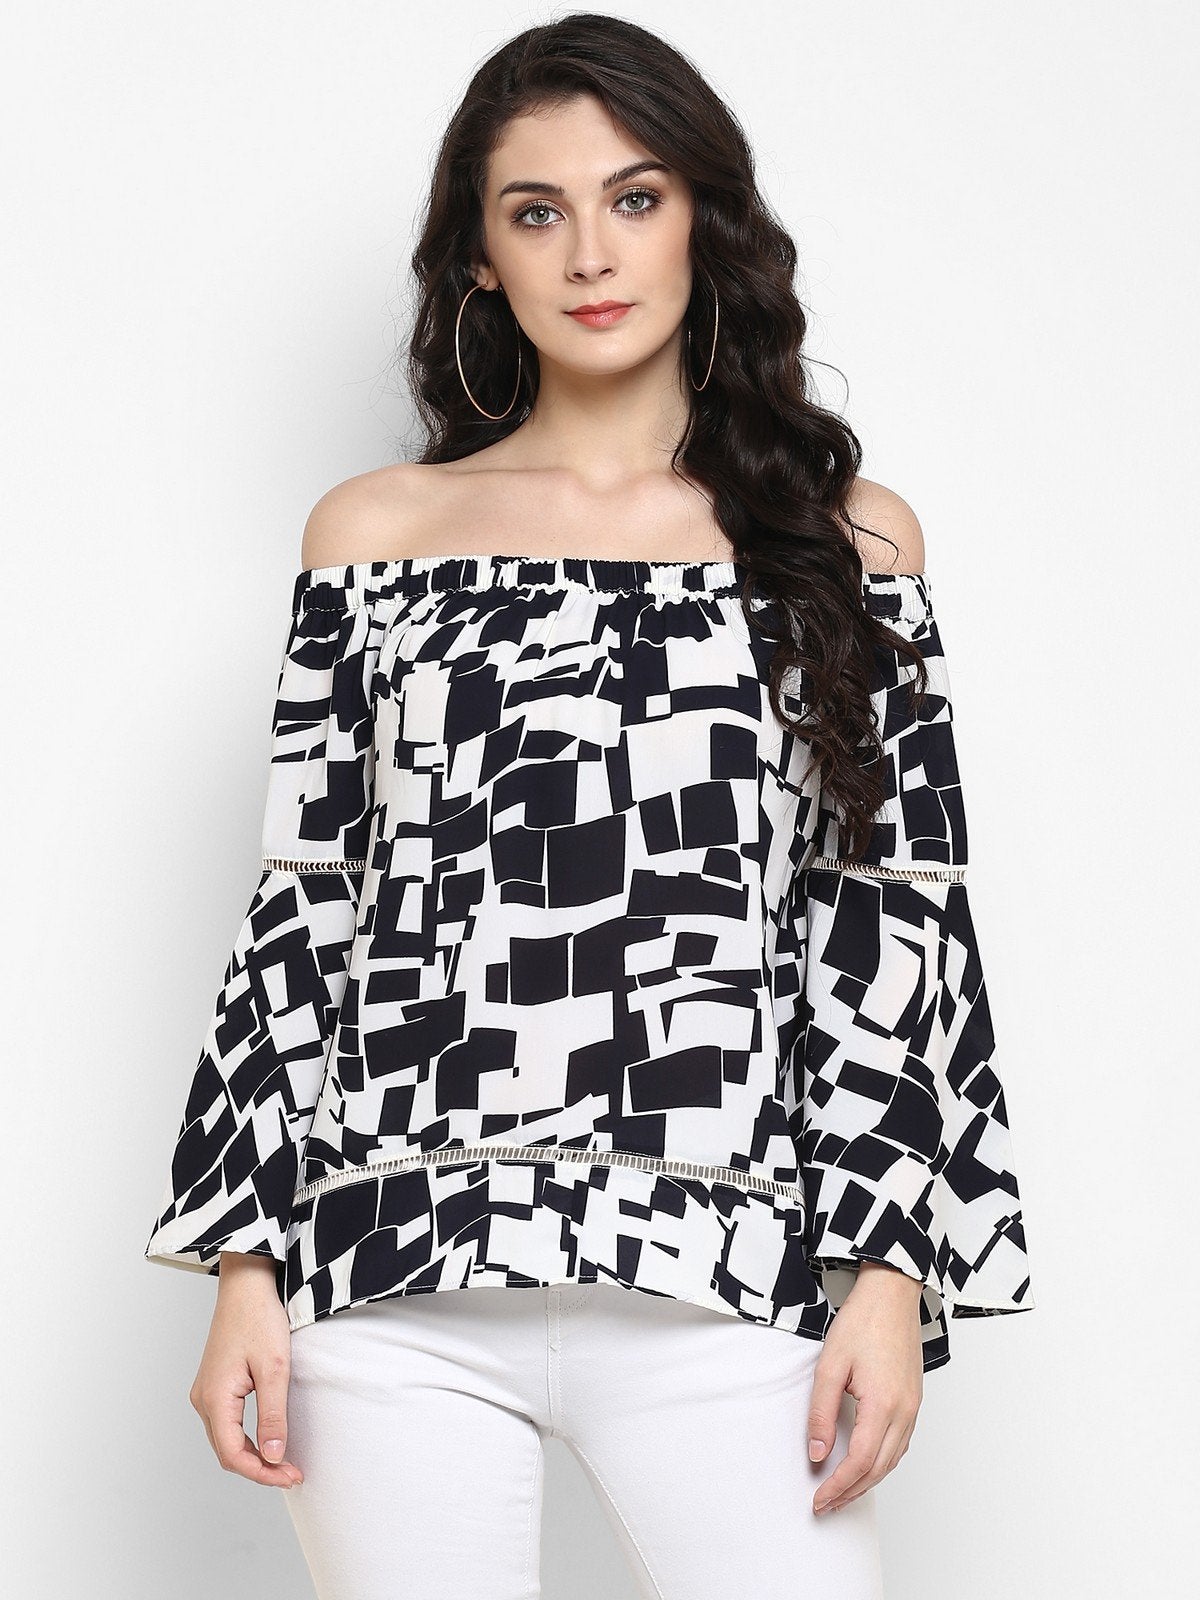 Women's Abstract Print Off-Shoulder Top - Pannkh